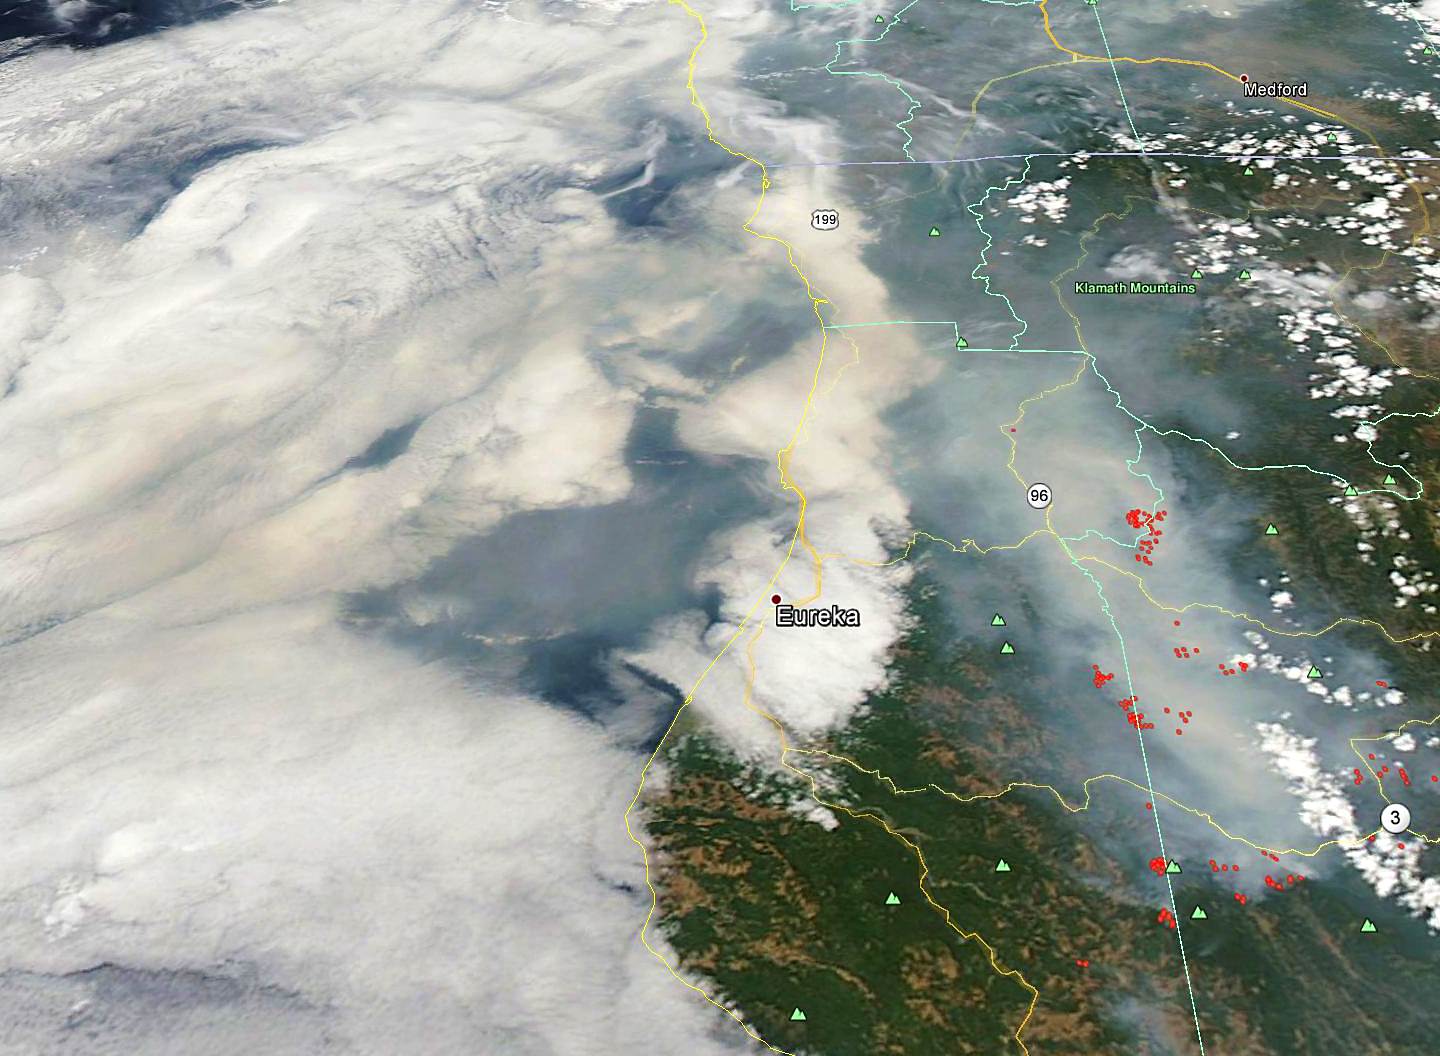 NASA color imagery from the Aqua satellite showing widespread wildfires over Northern California (remapped into Google Earth).